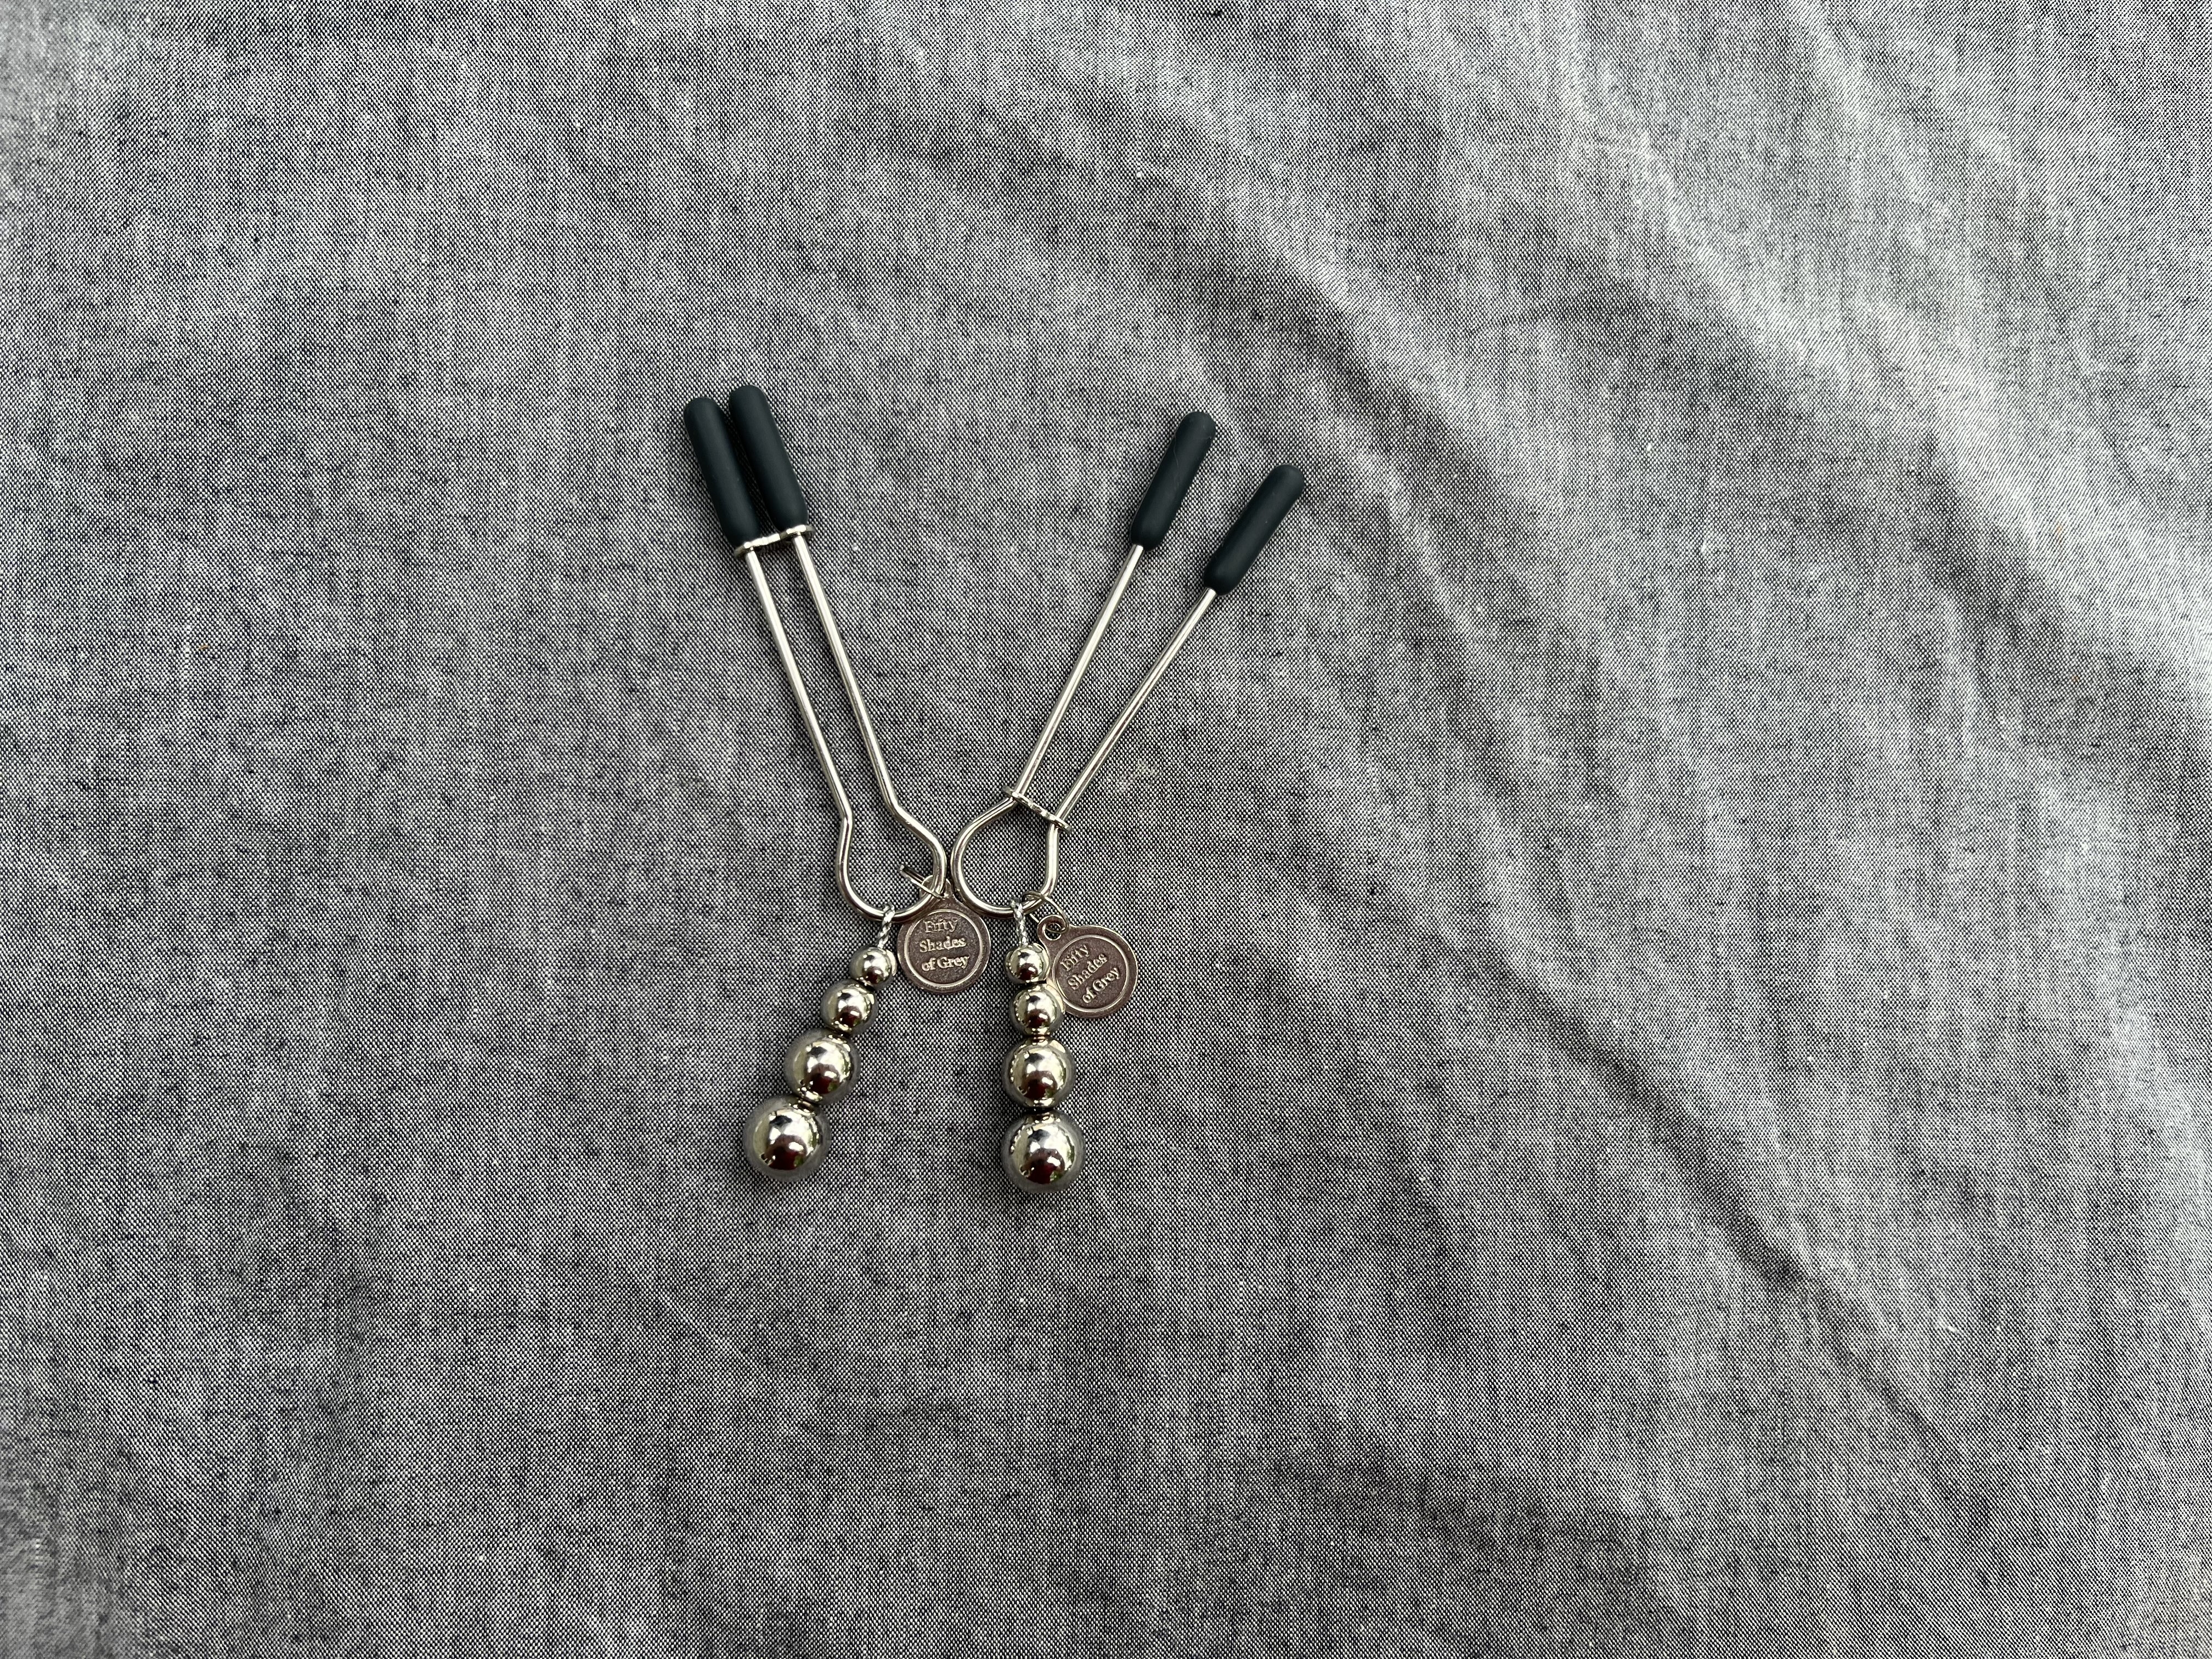 Fifty Shades of Grey The Pinch Adjustable Nipple Clamps. Slide 5